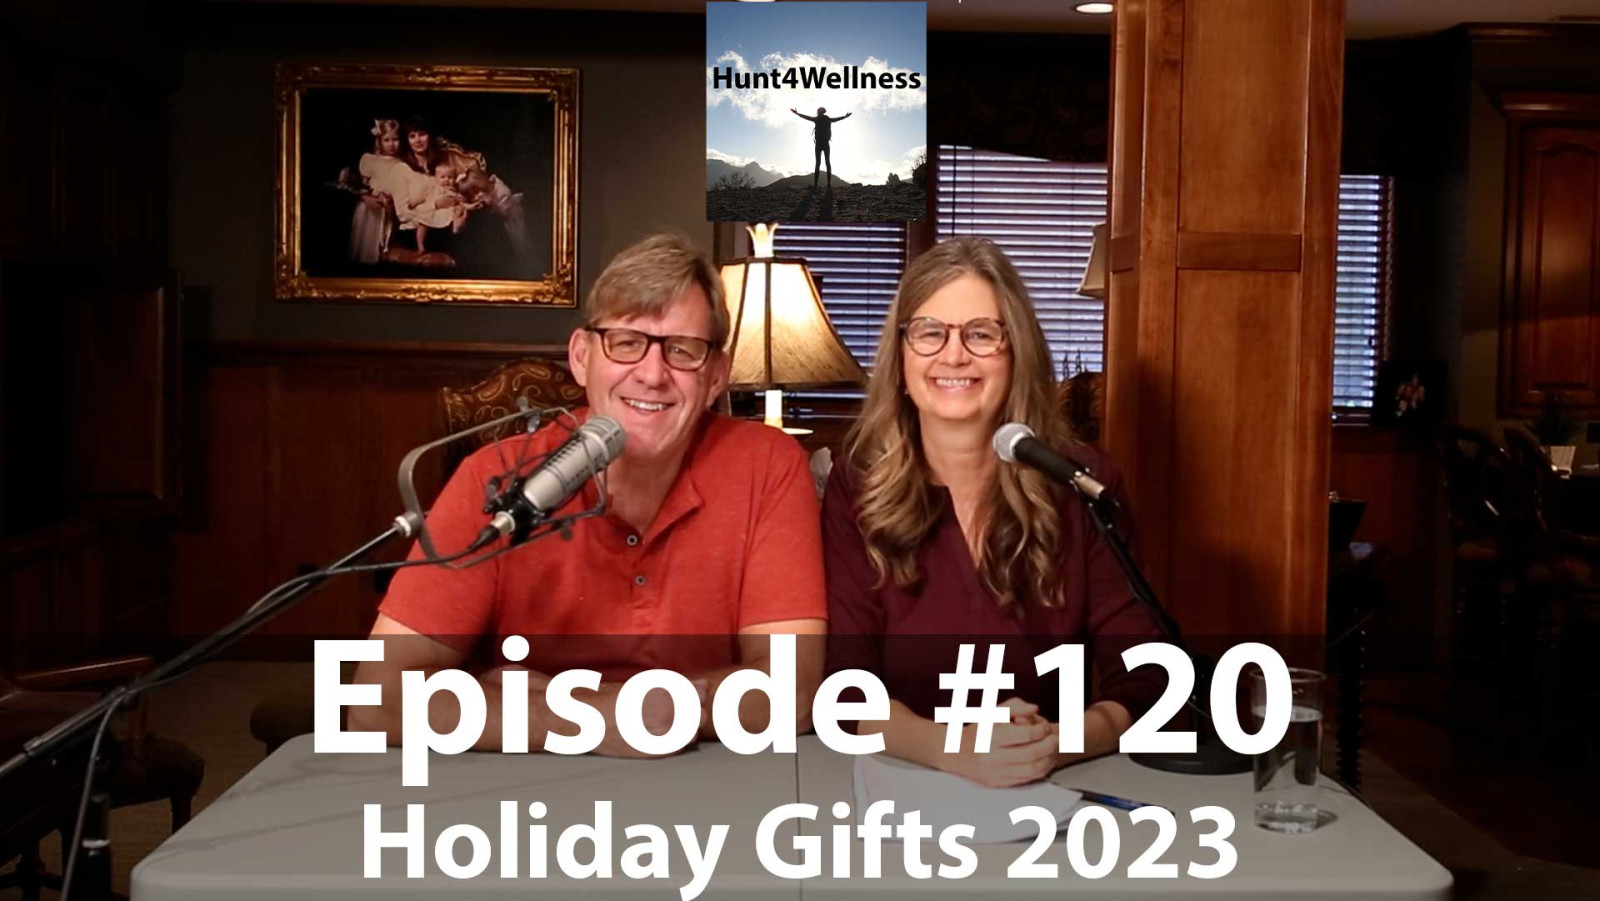 Episode #120 - Holiday Gifts 2023